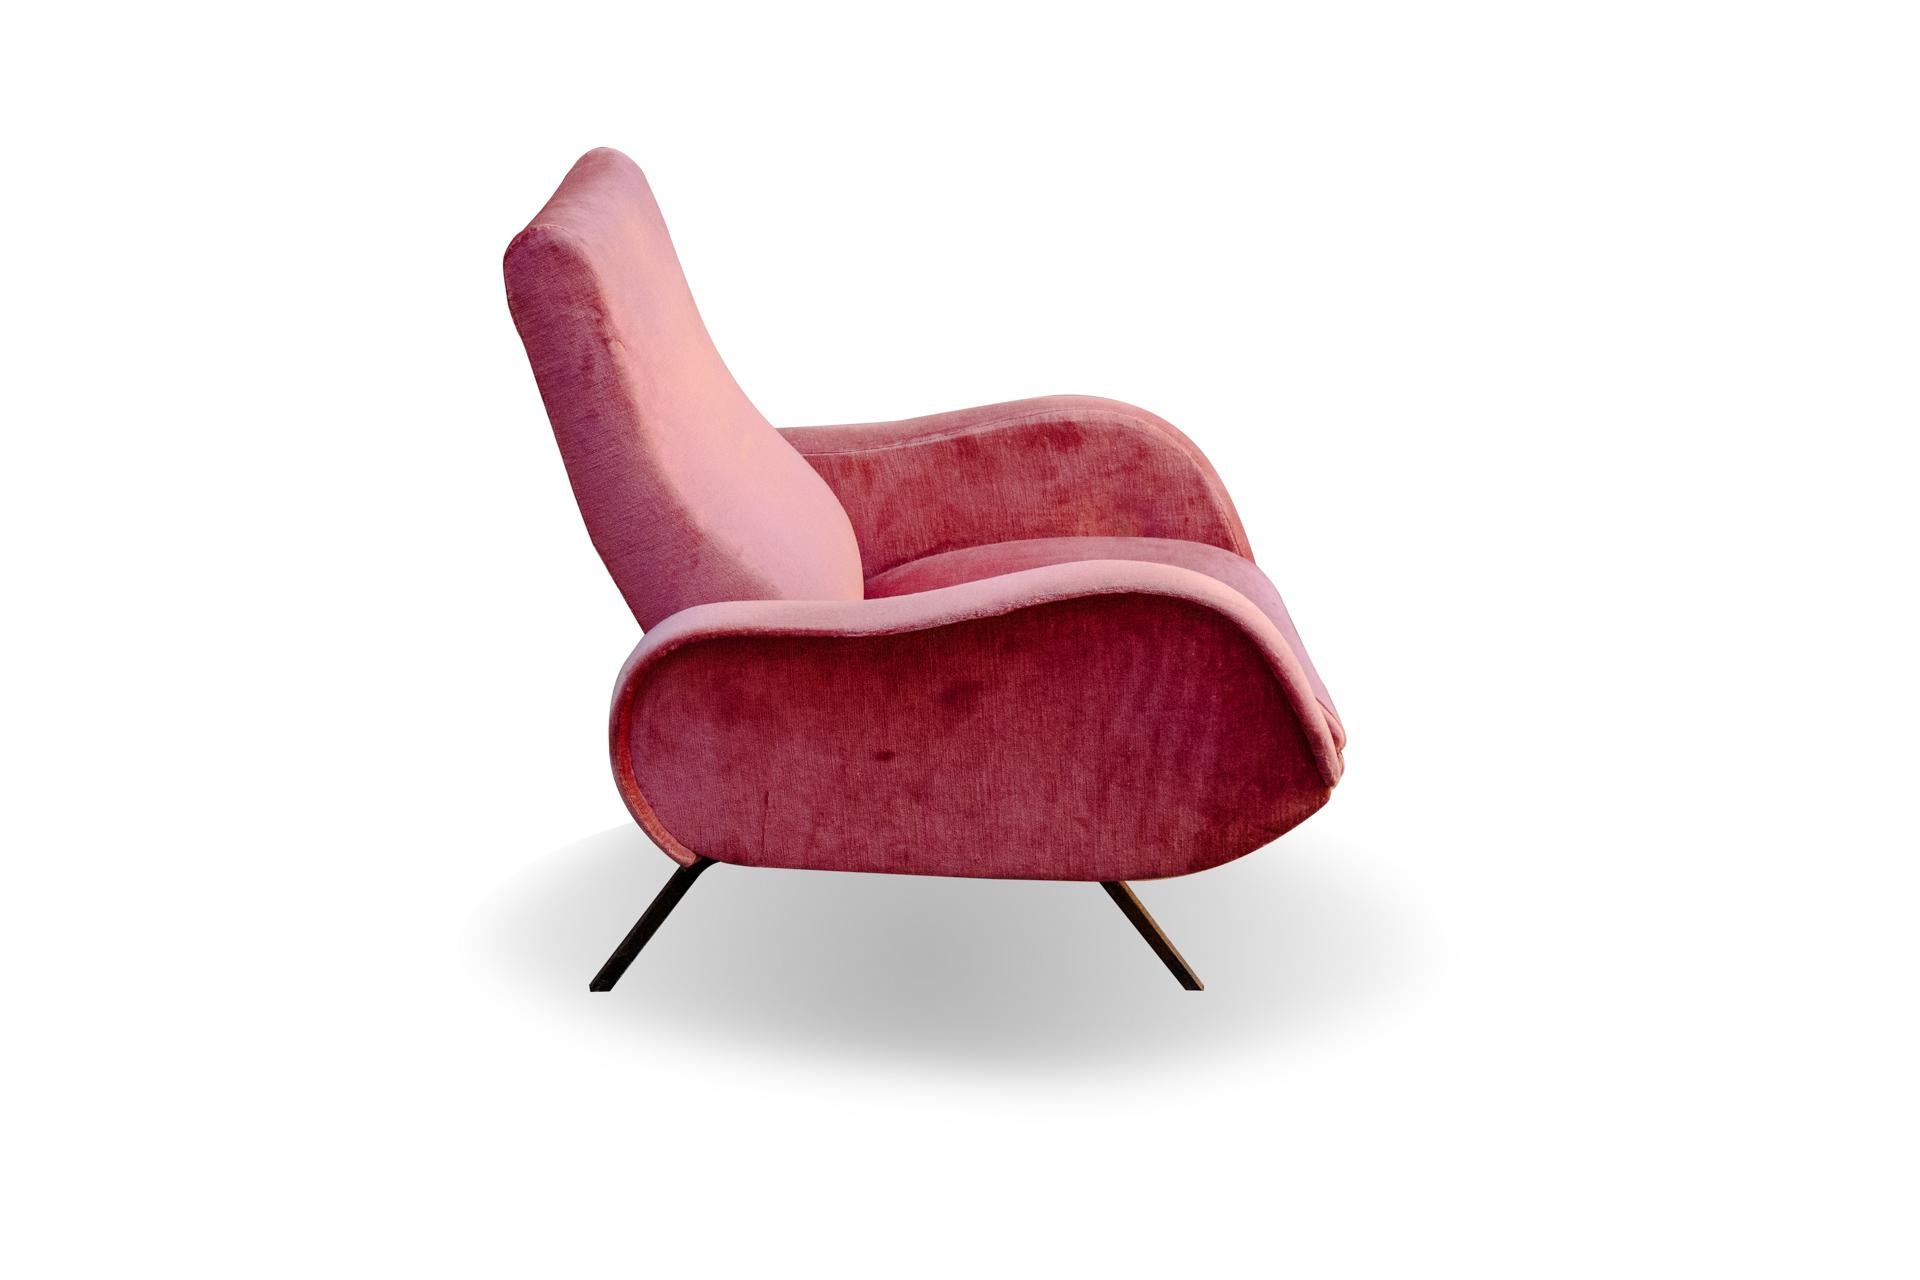 ISA Bergamo pink velvet Mid-Century Modeern lounge chair,
Original lounge chair from the 1950s, produced in Italy by ISA Bergamo .With which the best and most famous for the iconic Italian design collaborated in the manner of Gio Ponti , Ico Parisi